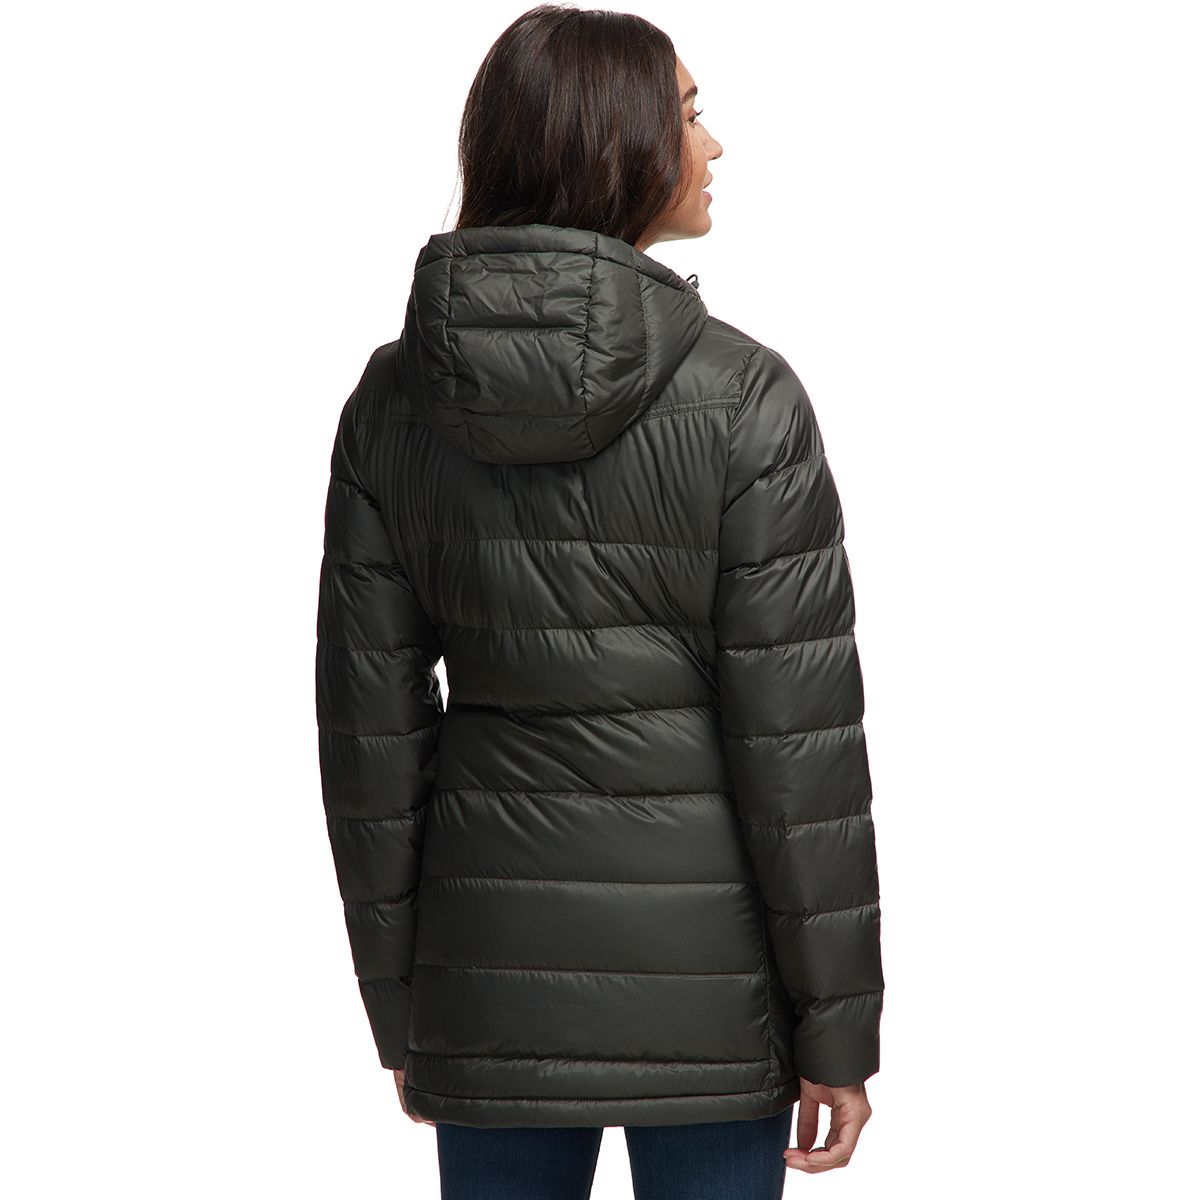 Outdoor Research Transcendent Down Parka - Women's - Clothing